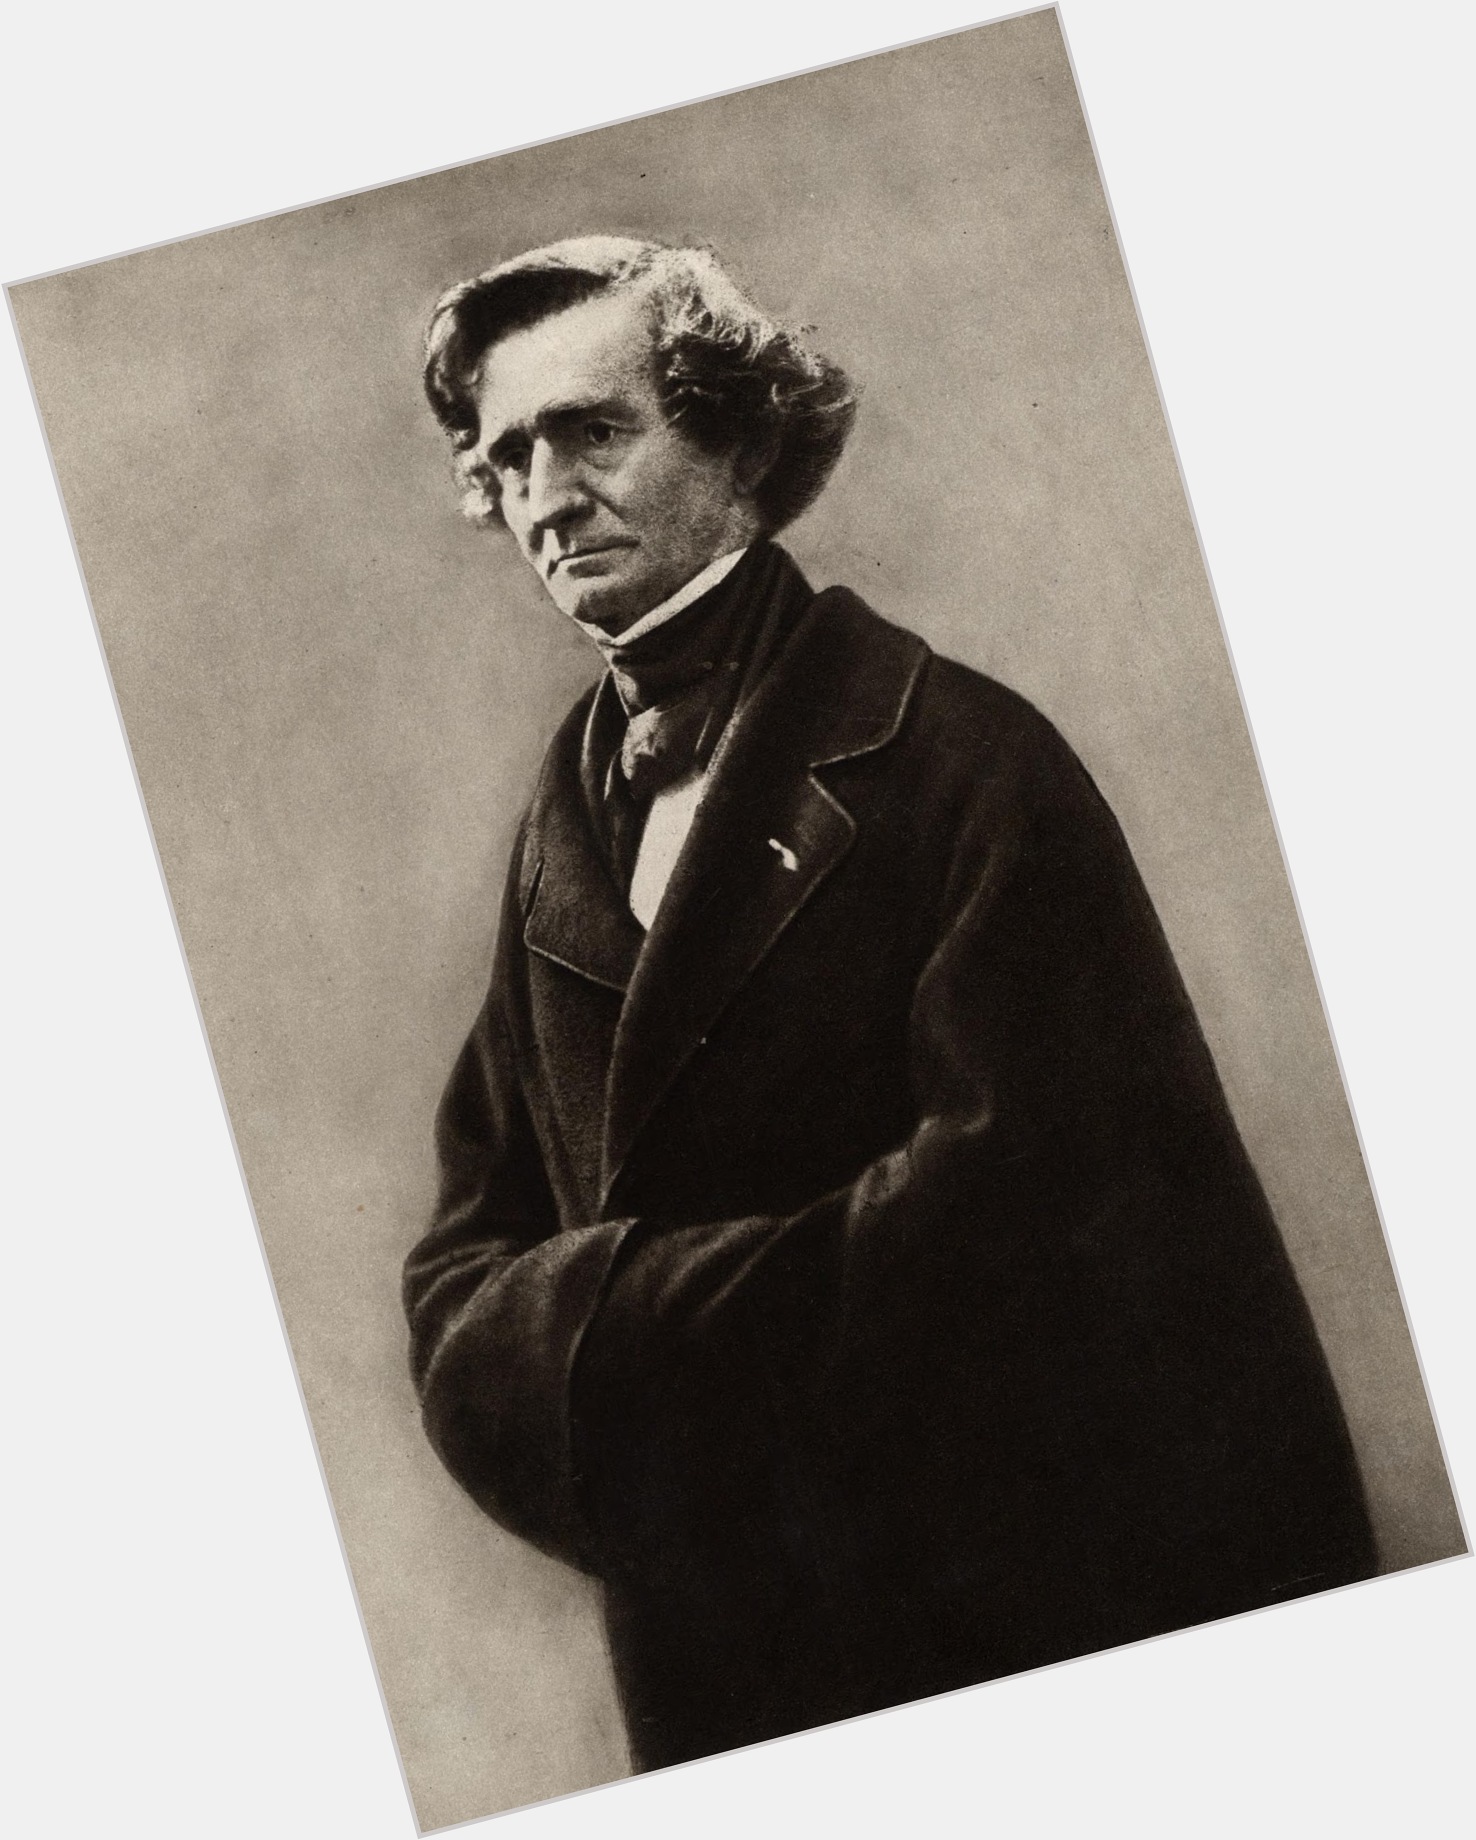 <a href="/hot-men/hector-berlioz/is-he-what-berliozs-symphonie-fantastique-about-why">Hector Berlioz</a>  